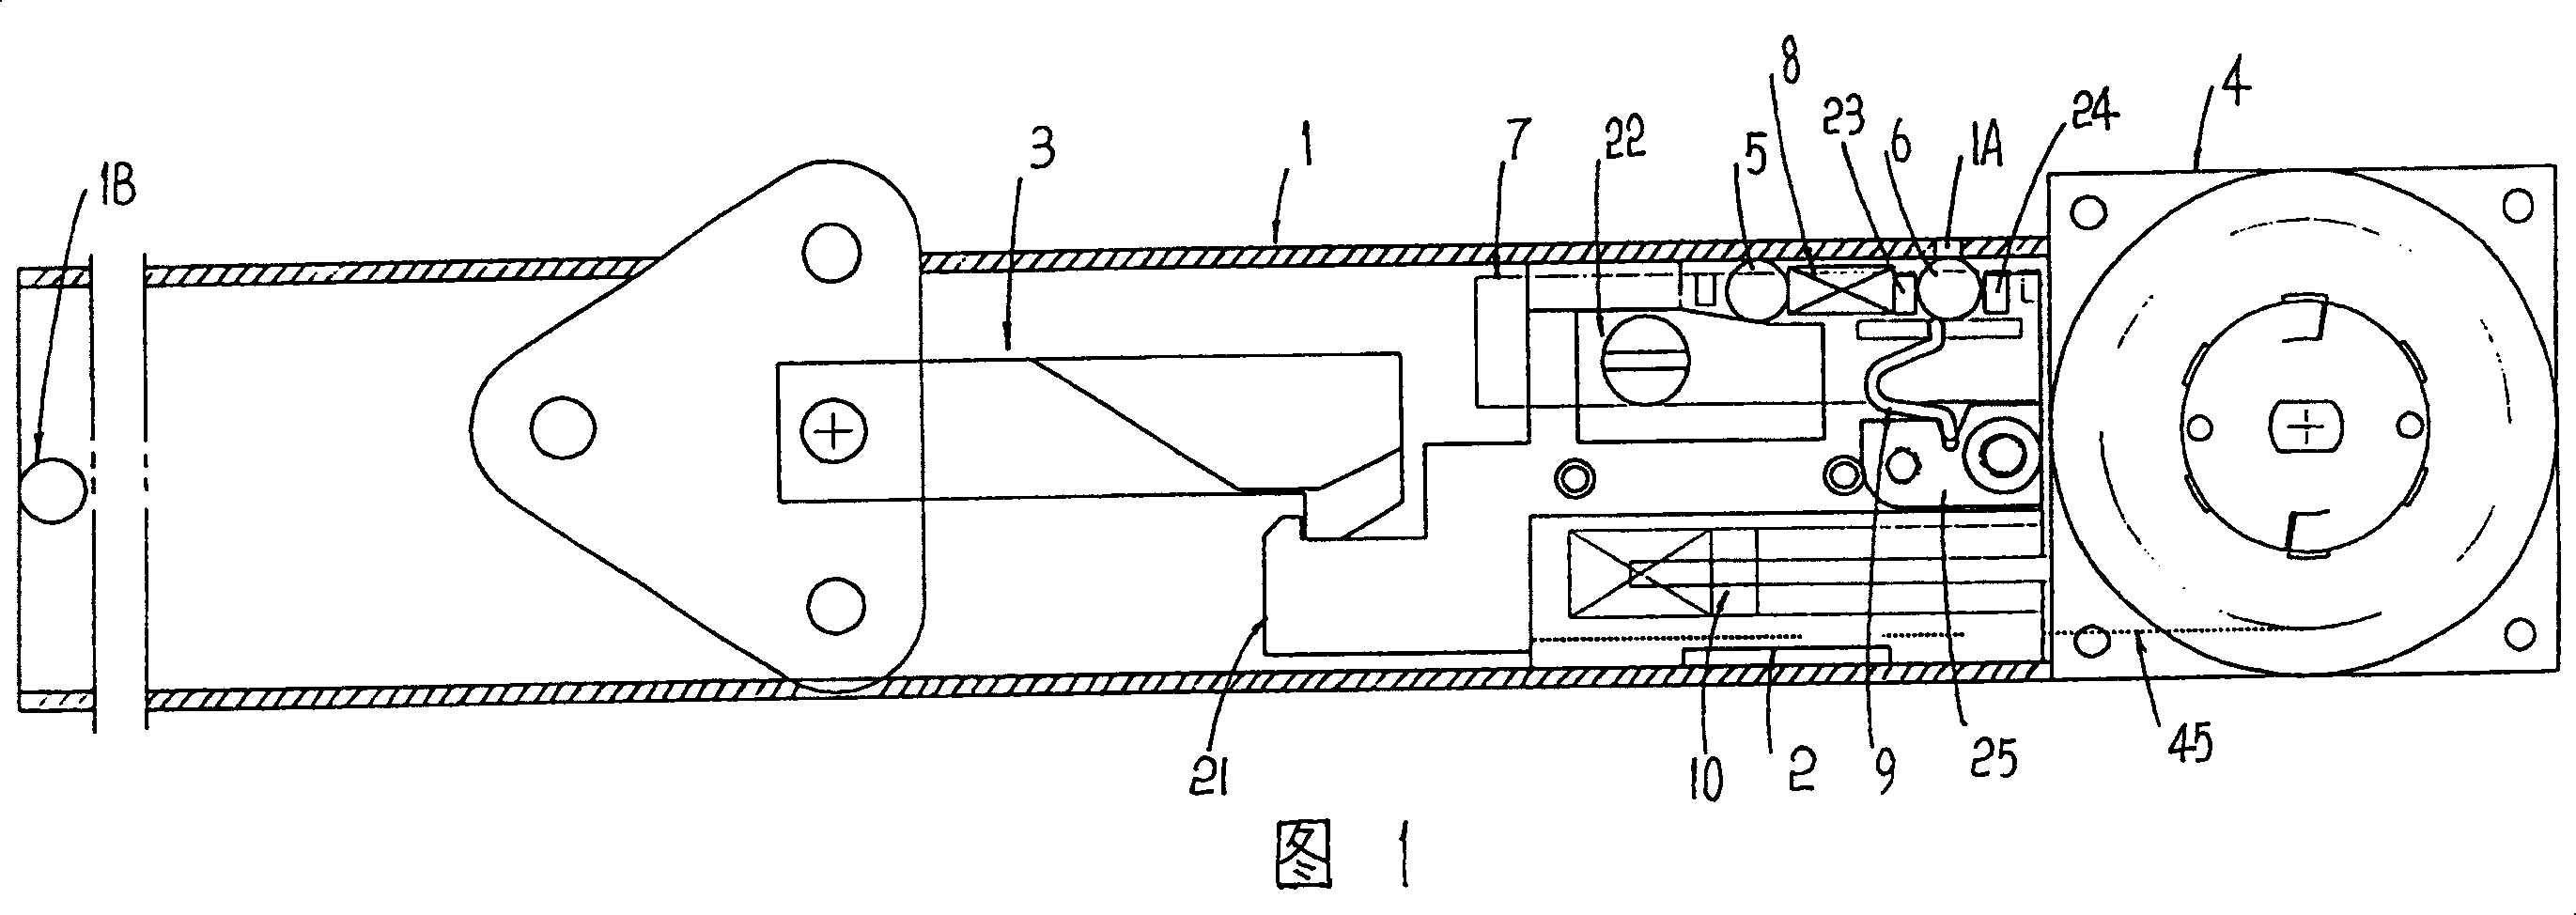 Optional stop automatic closing device of sliding mechanism